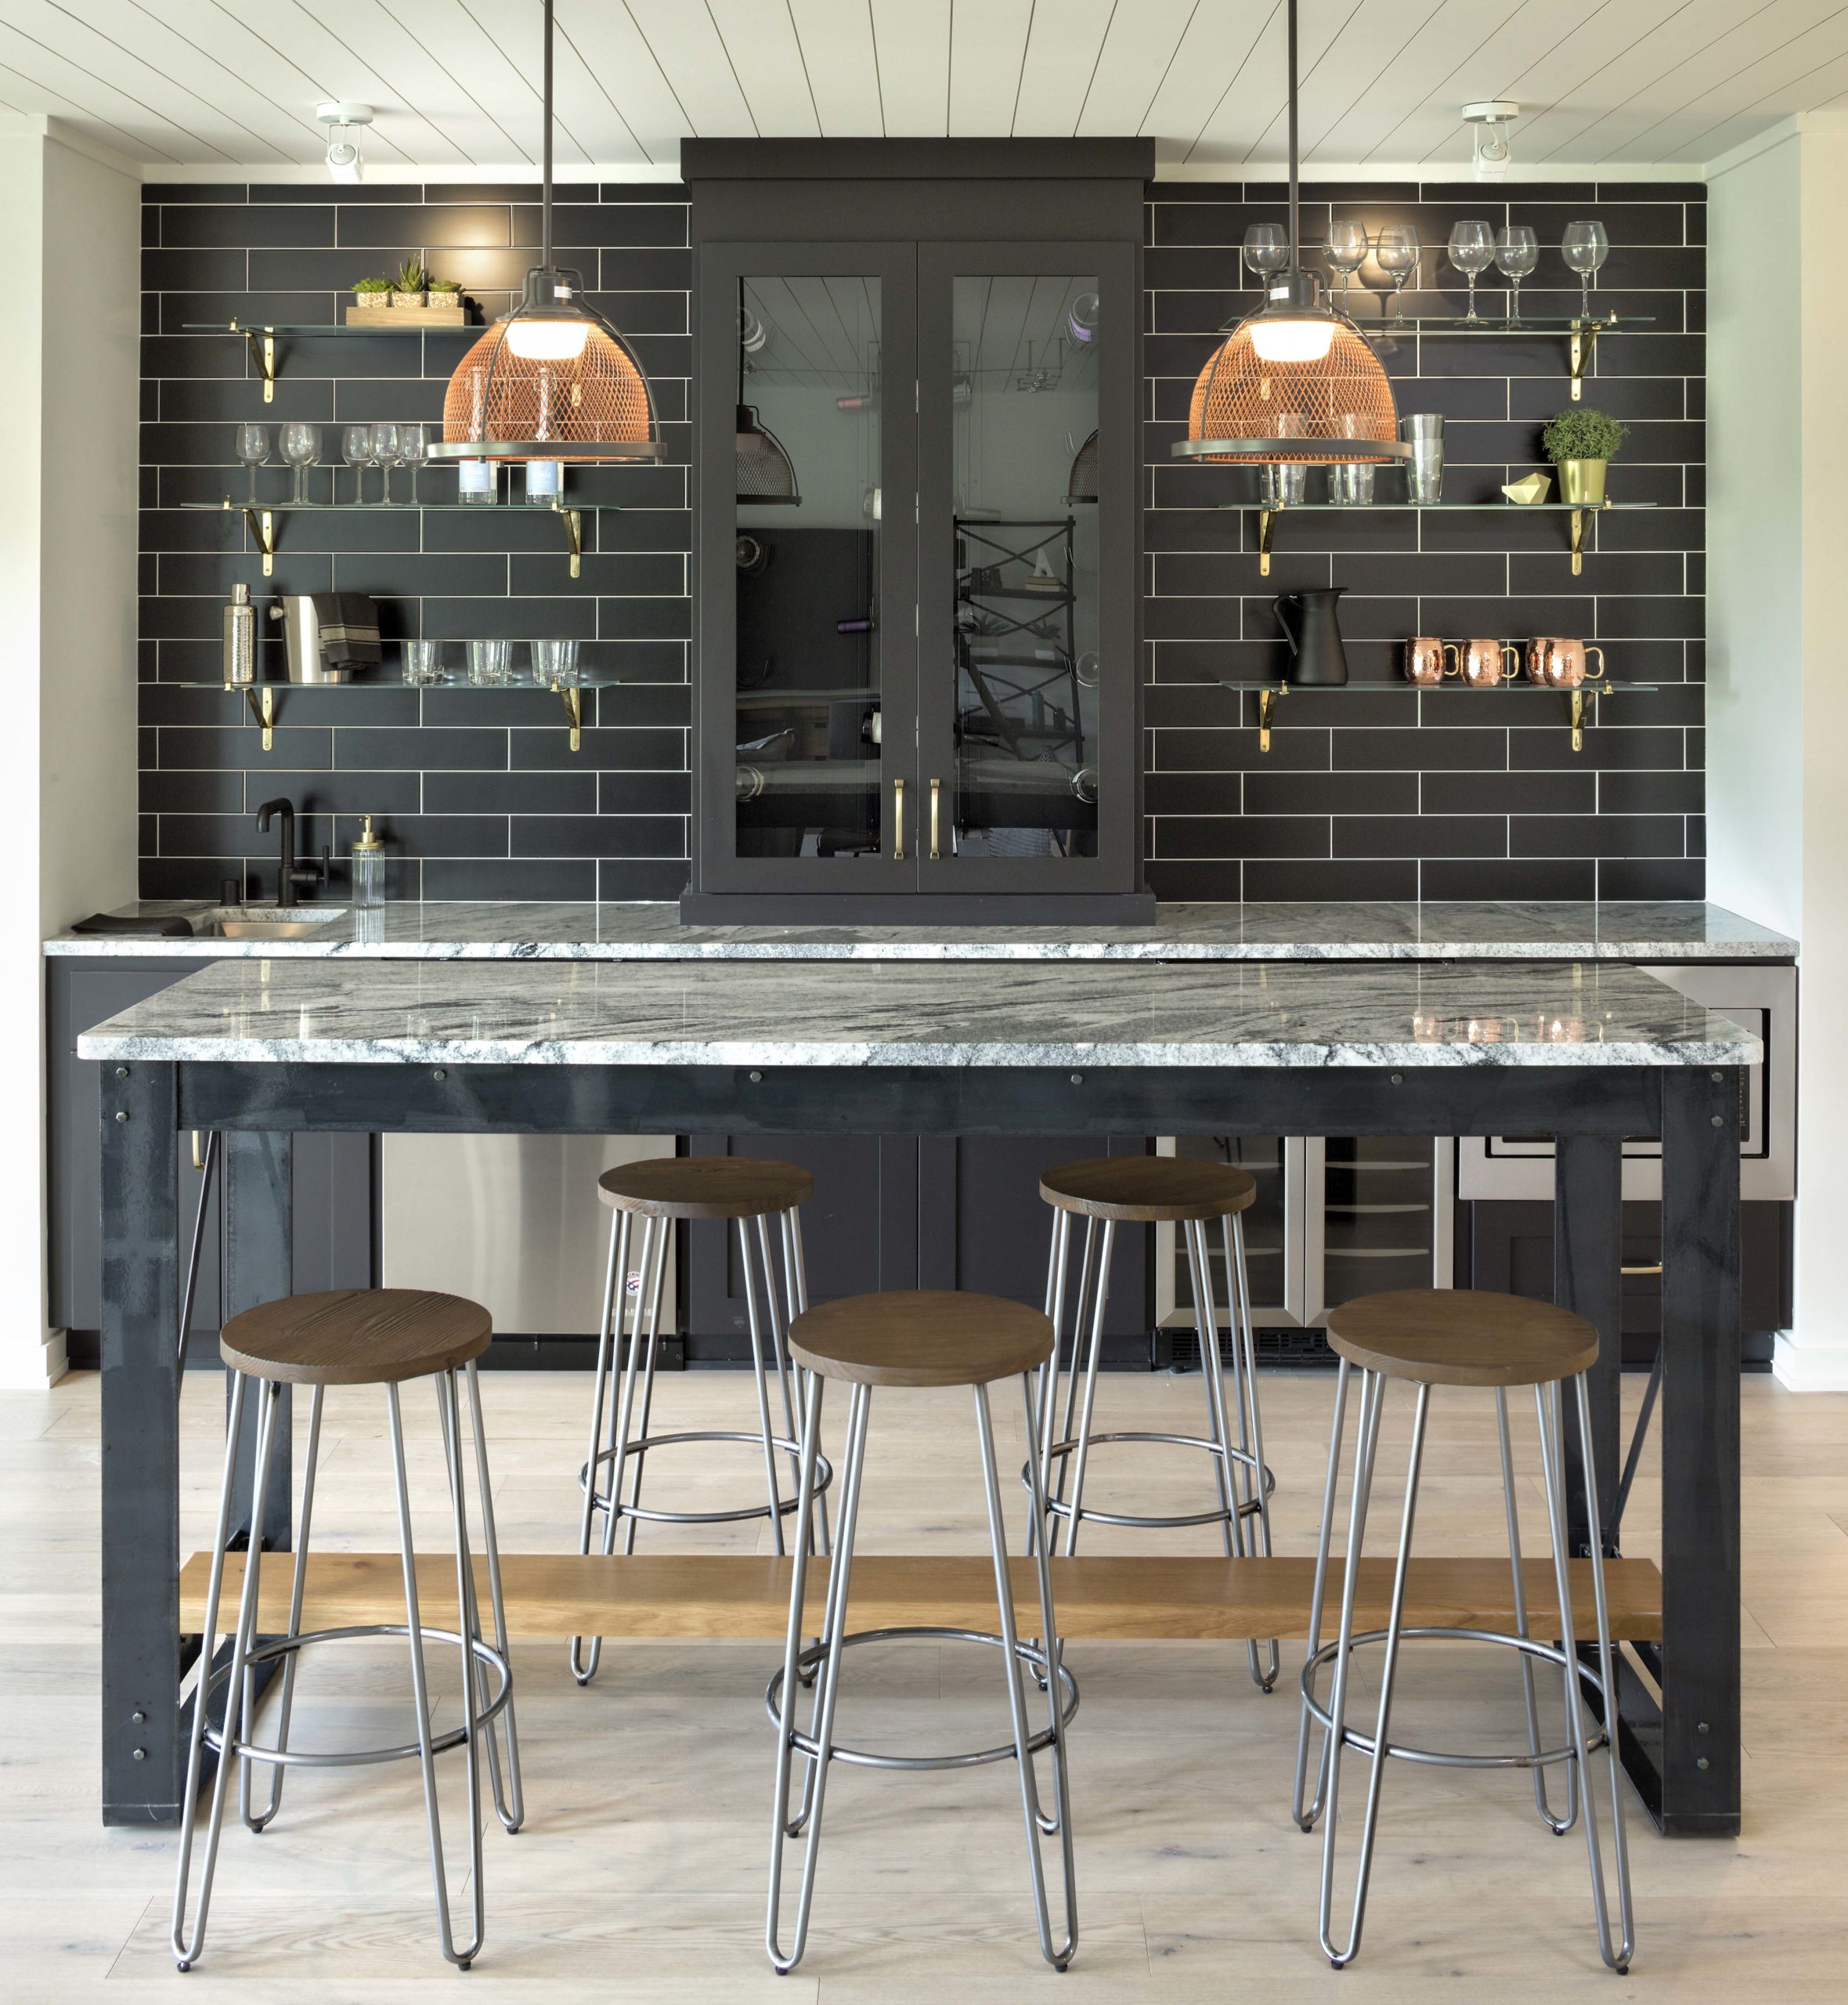 A Reverence kitchen with a farmhouse-style bar and stools in Lakeville, Minnesota.